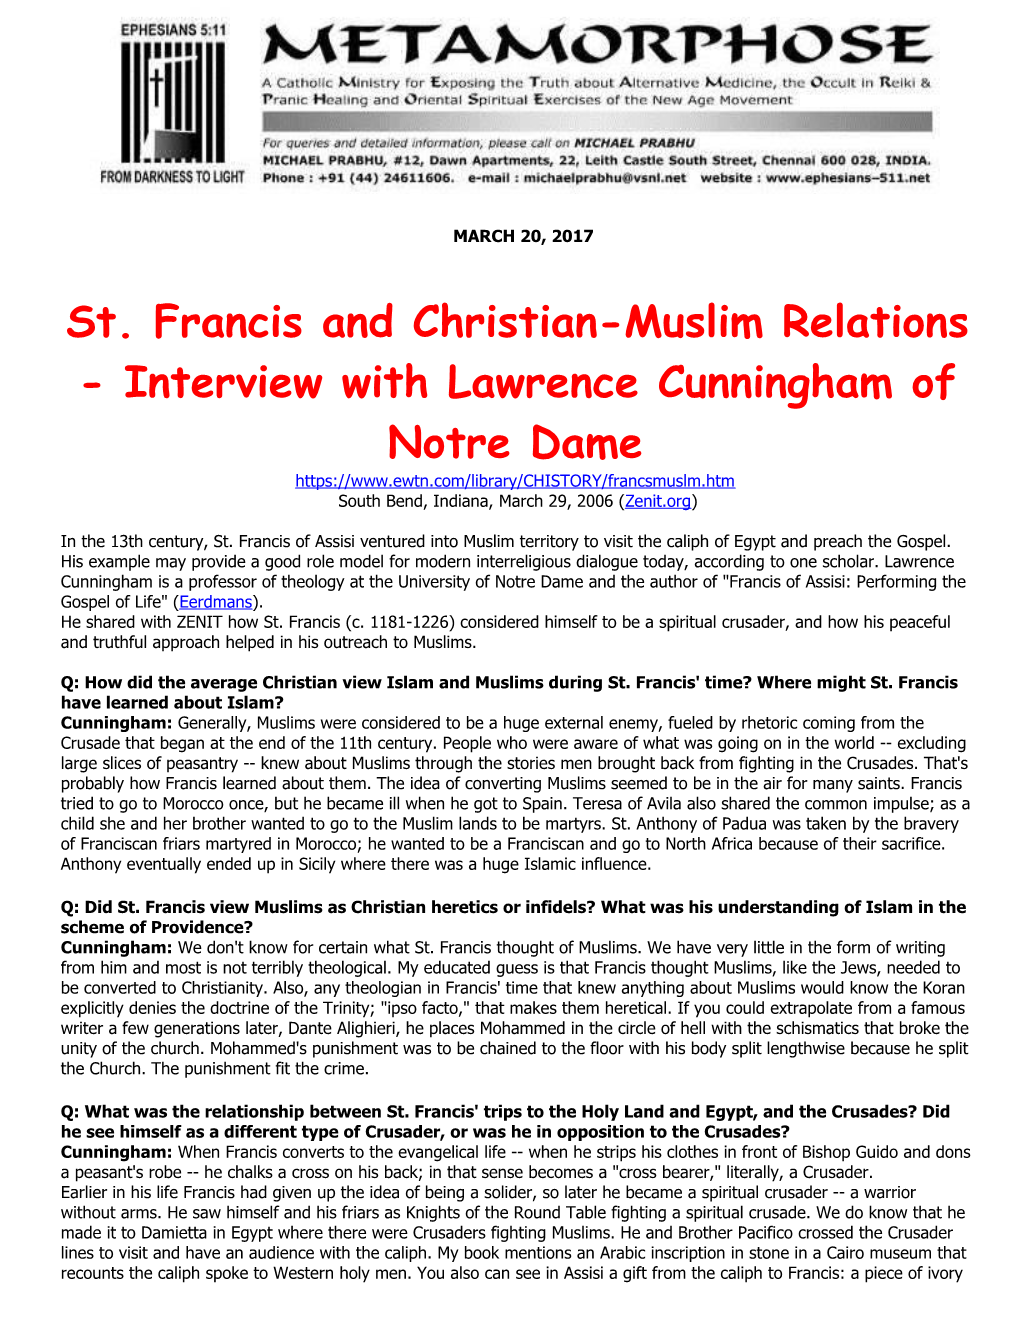 St. Francis and Christian-Muslim Relations - Interview with Lawrence Cunningham of Notre Dame